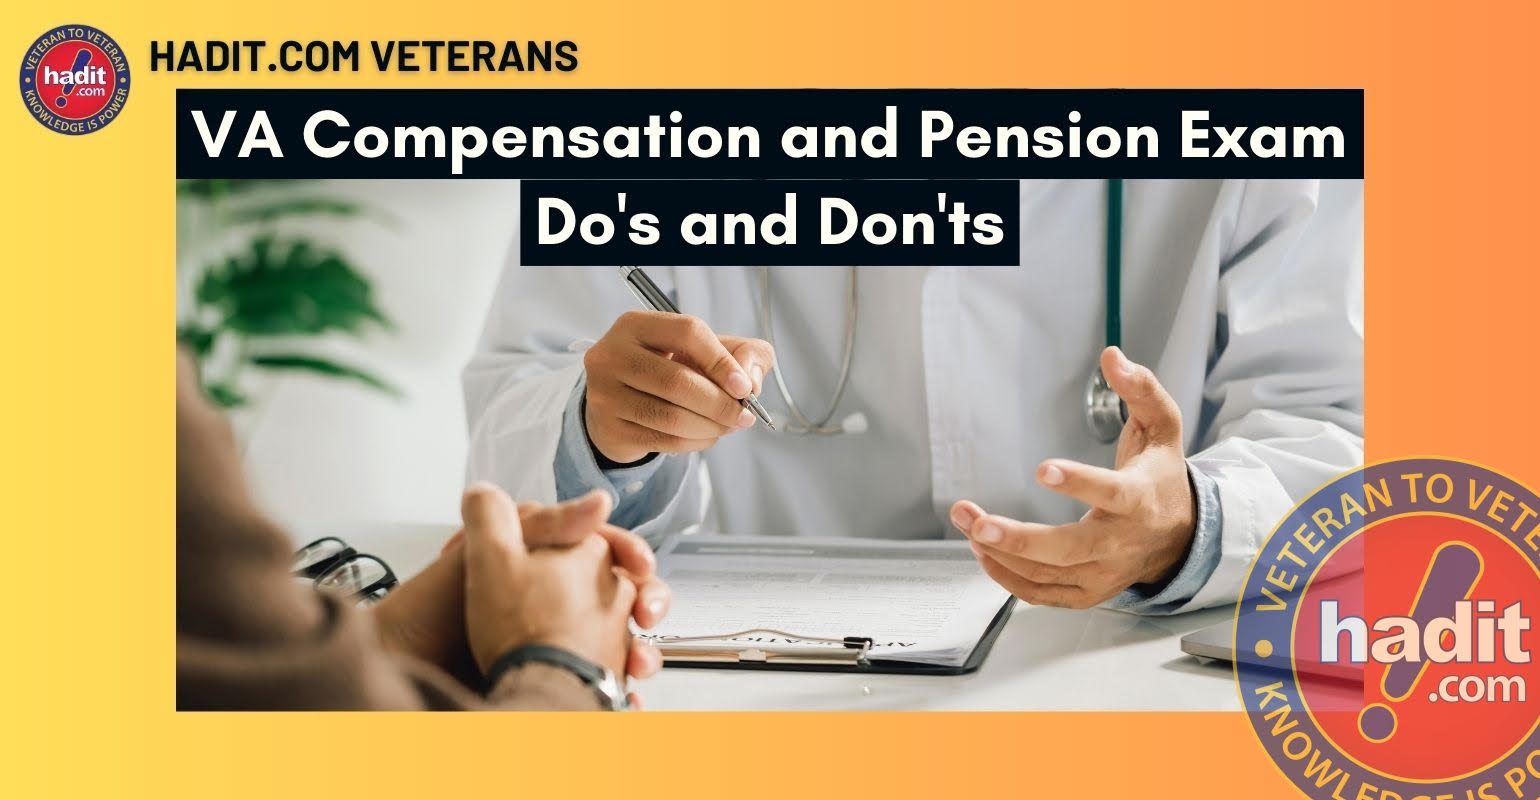 A banner featuring "VA Compensation and Pension Exam Do's and Don'ts" with the hadit.com Veterans logo, showing a doctor in a white coat holding a stethoscope and speaking with an unseen patient, with documents on the table.